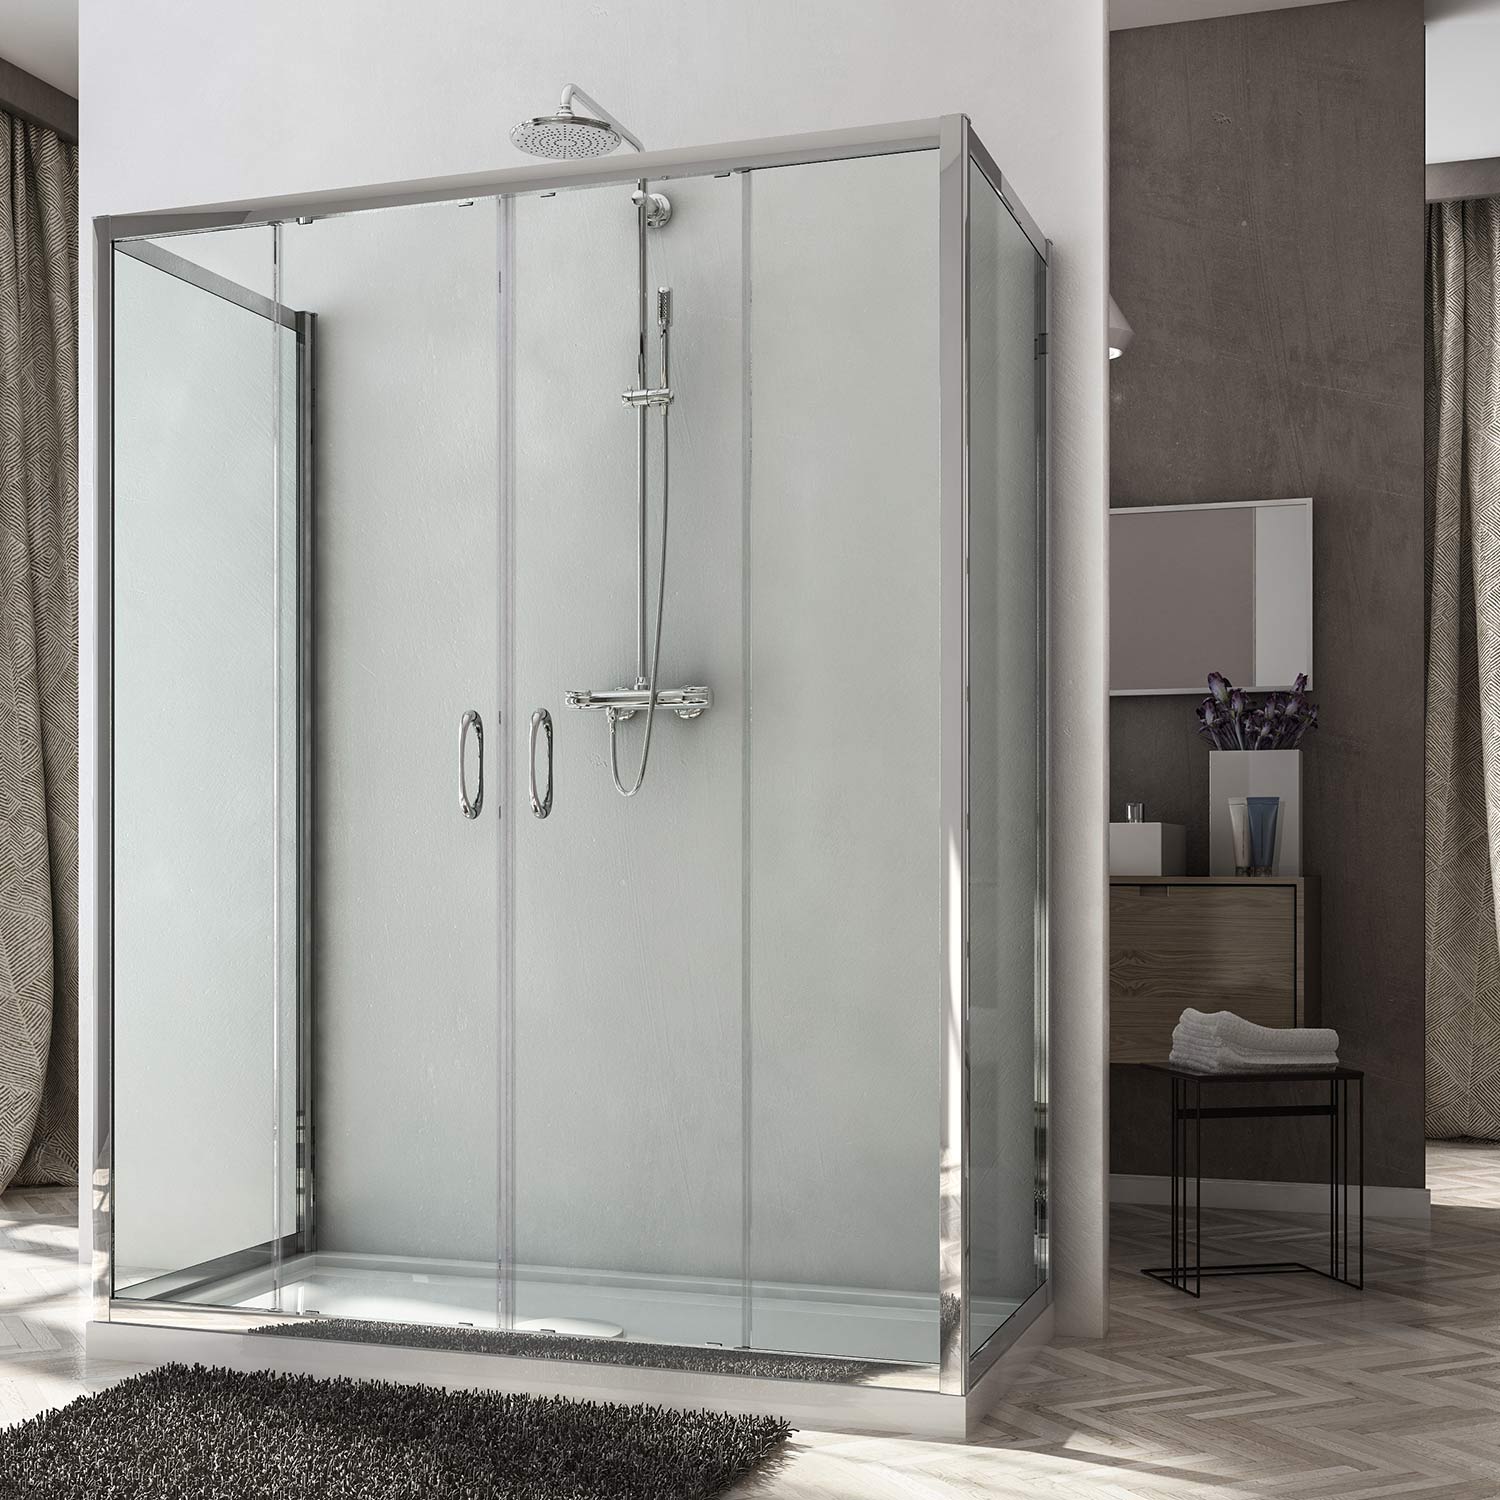 3 sided shower cabin, double sliding door, 185 or 198 cm height, transparent or opaque crystal 